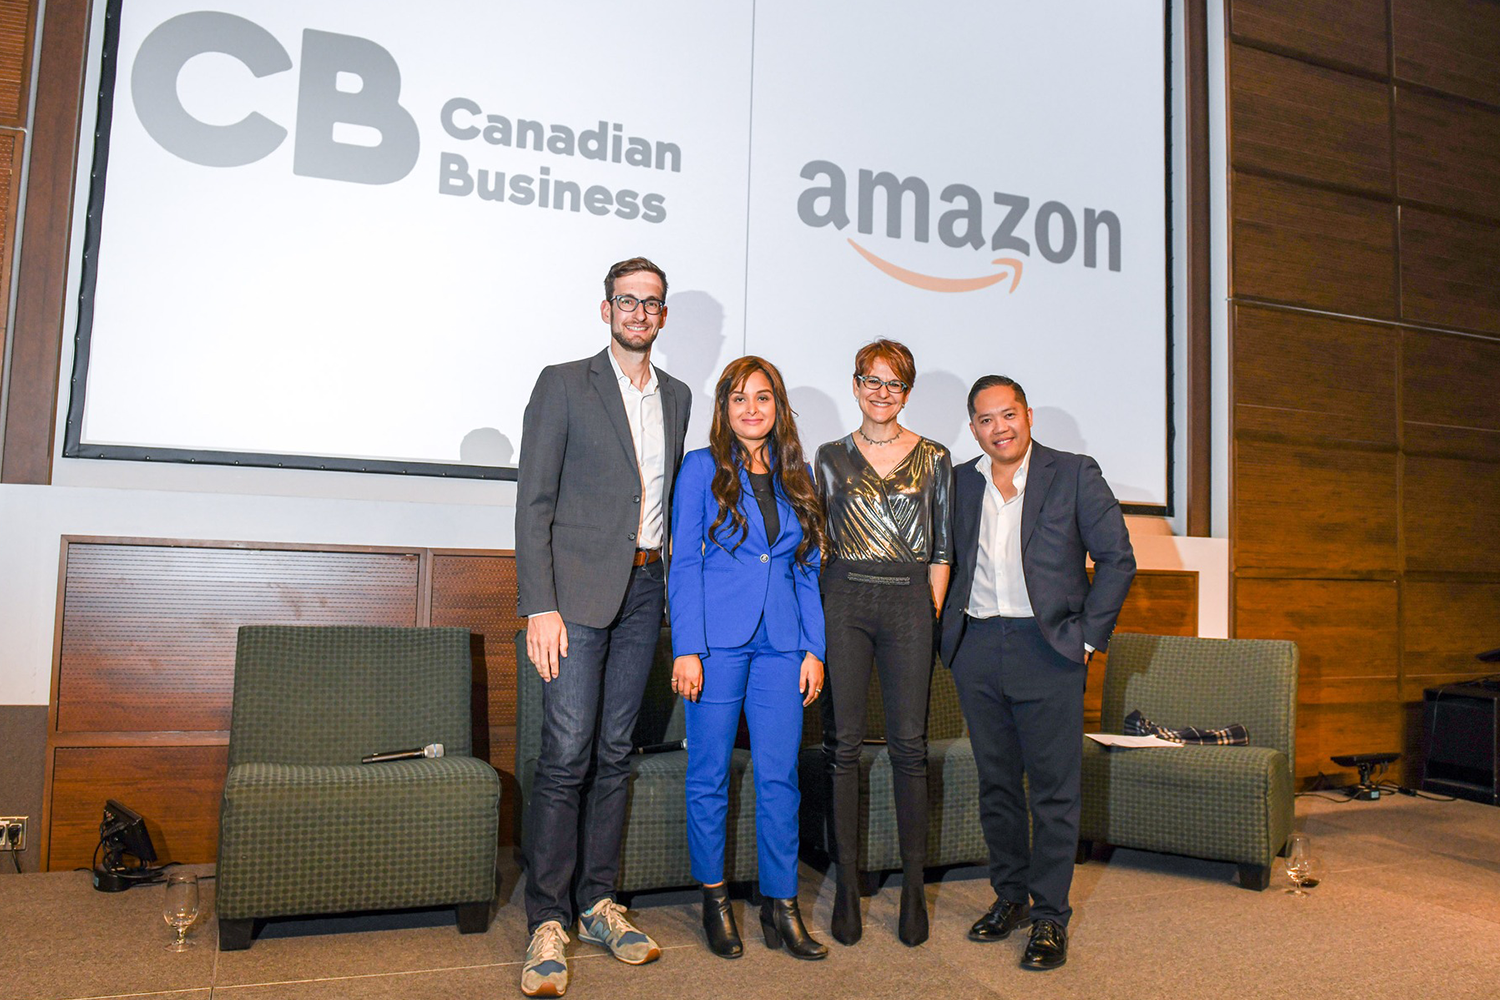 A photo of panelists at a Canadian Business and Amazon Canada event standing on stage